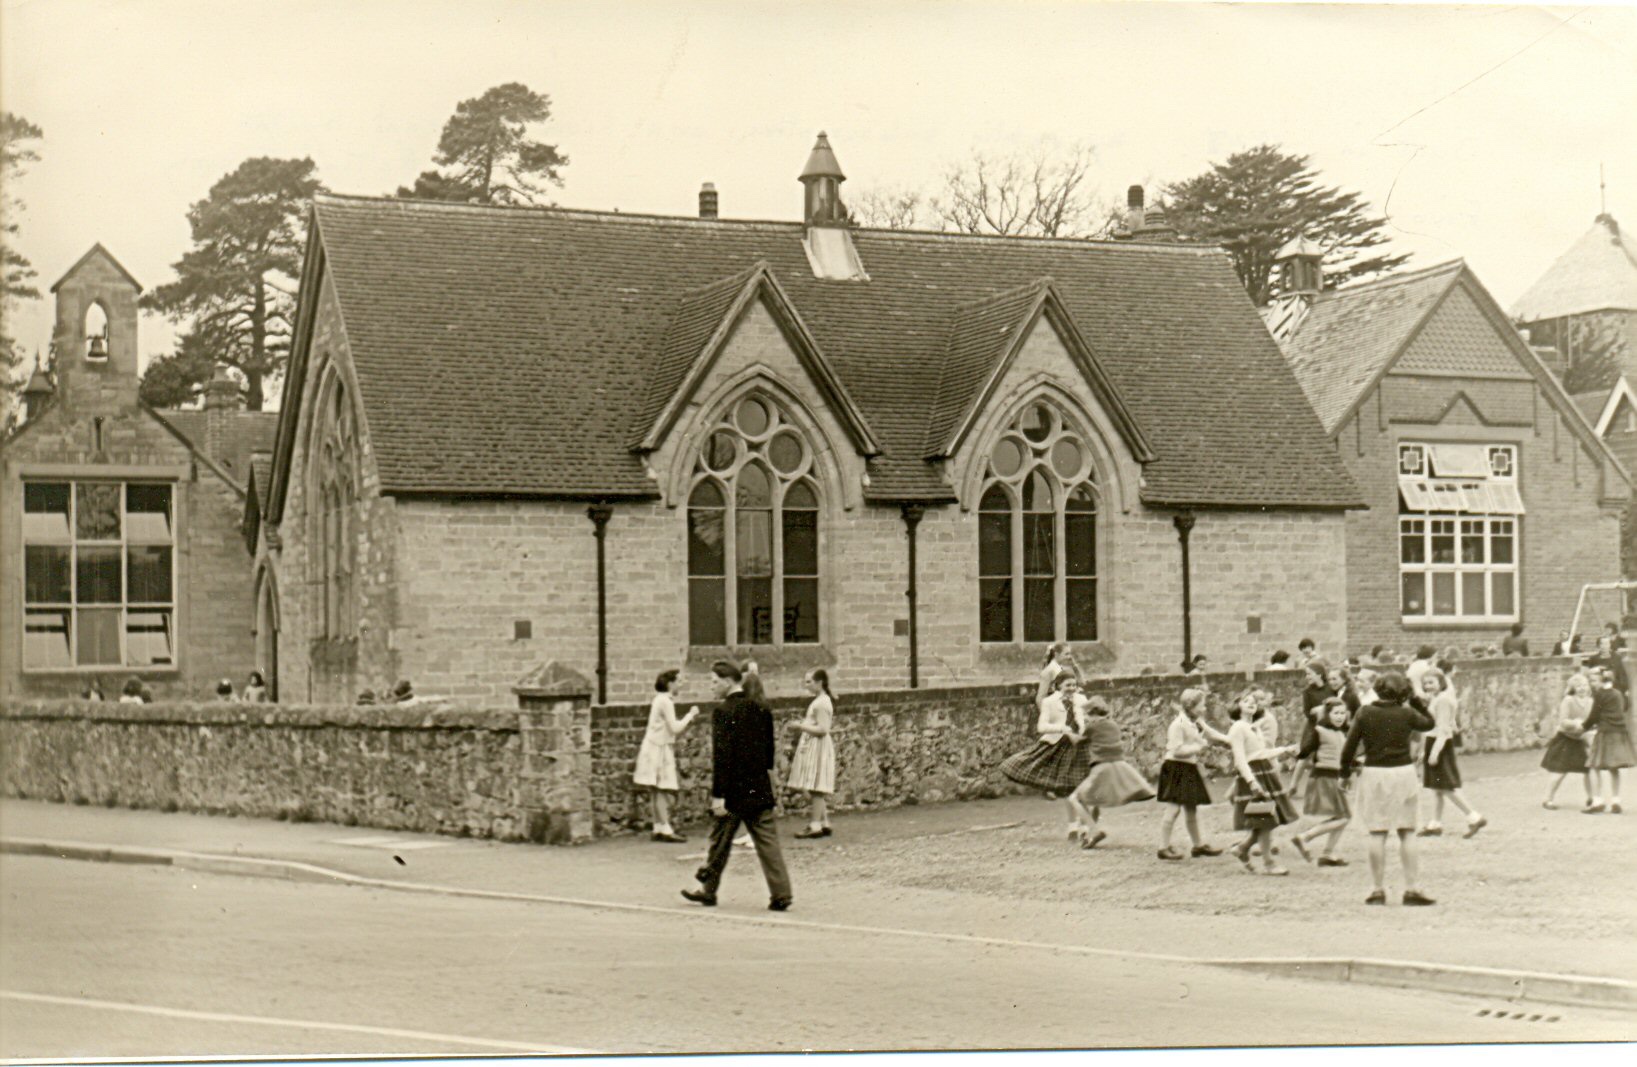 Black and white photograph of the National School in Cranleigh after the new classrooms were added in 1871. Children are playing outside